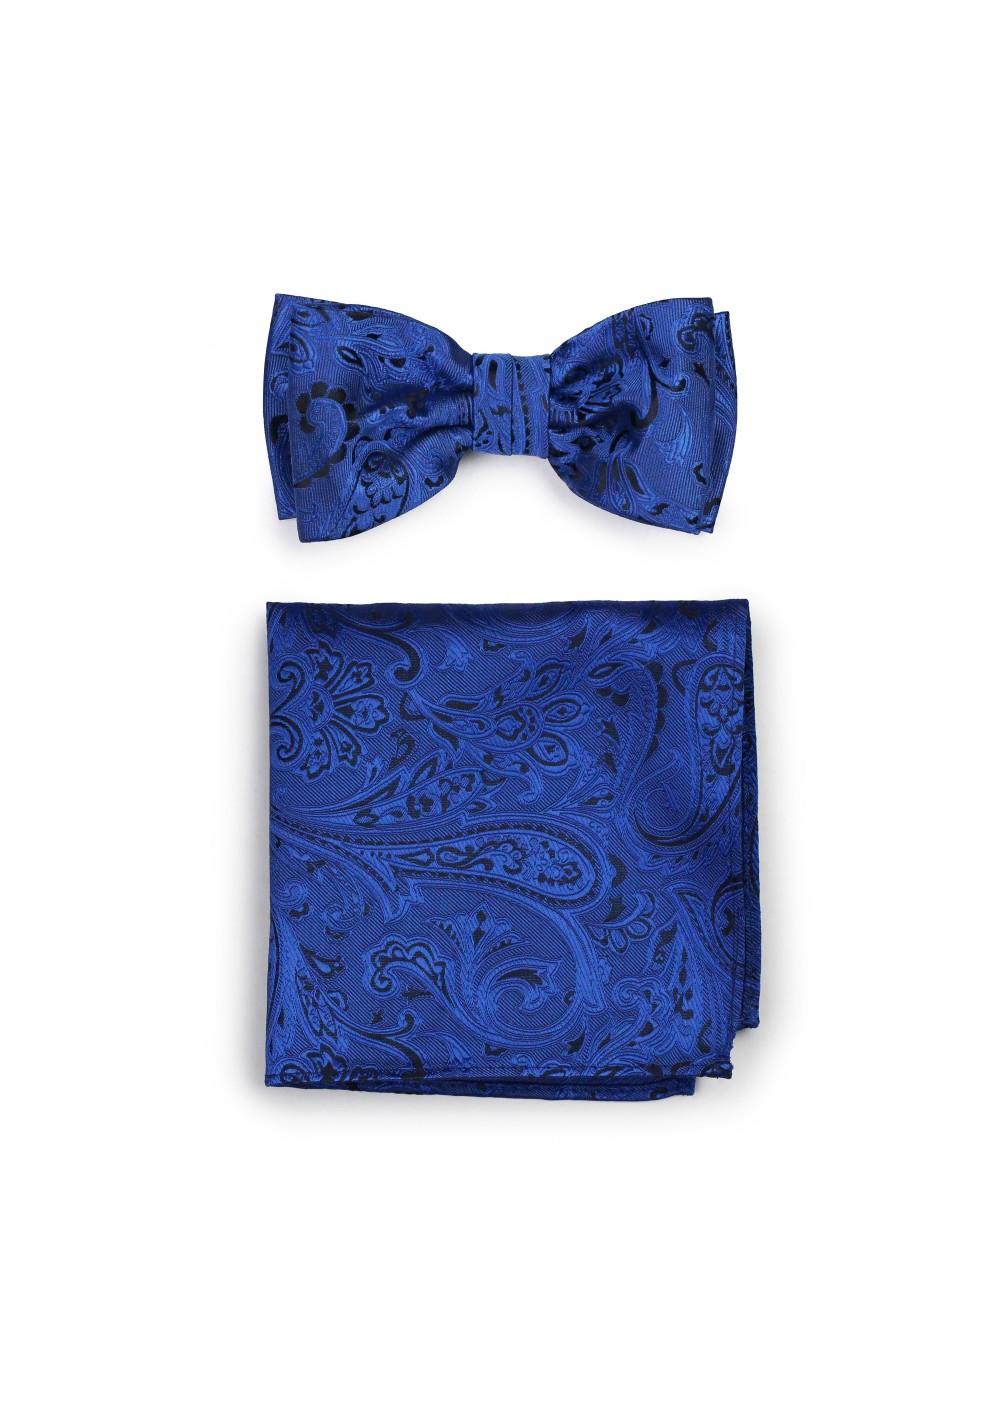 New formal Paisley Self-tied Bow Tie & Pocket Square Hankie Set Navy Blue Green 